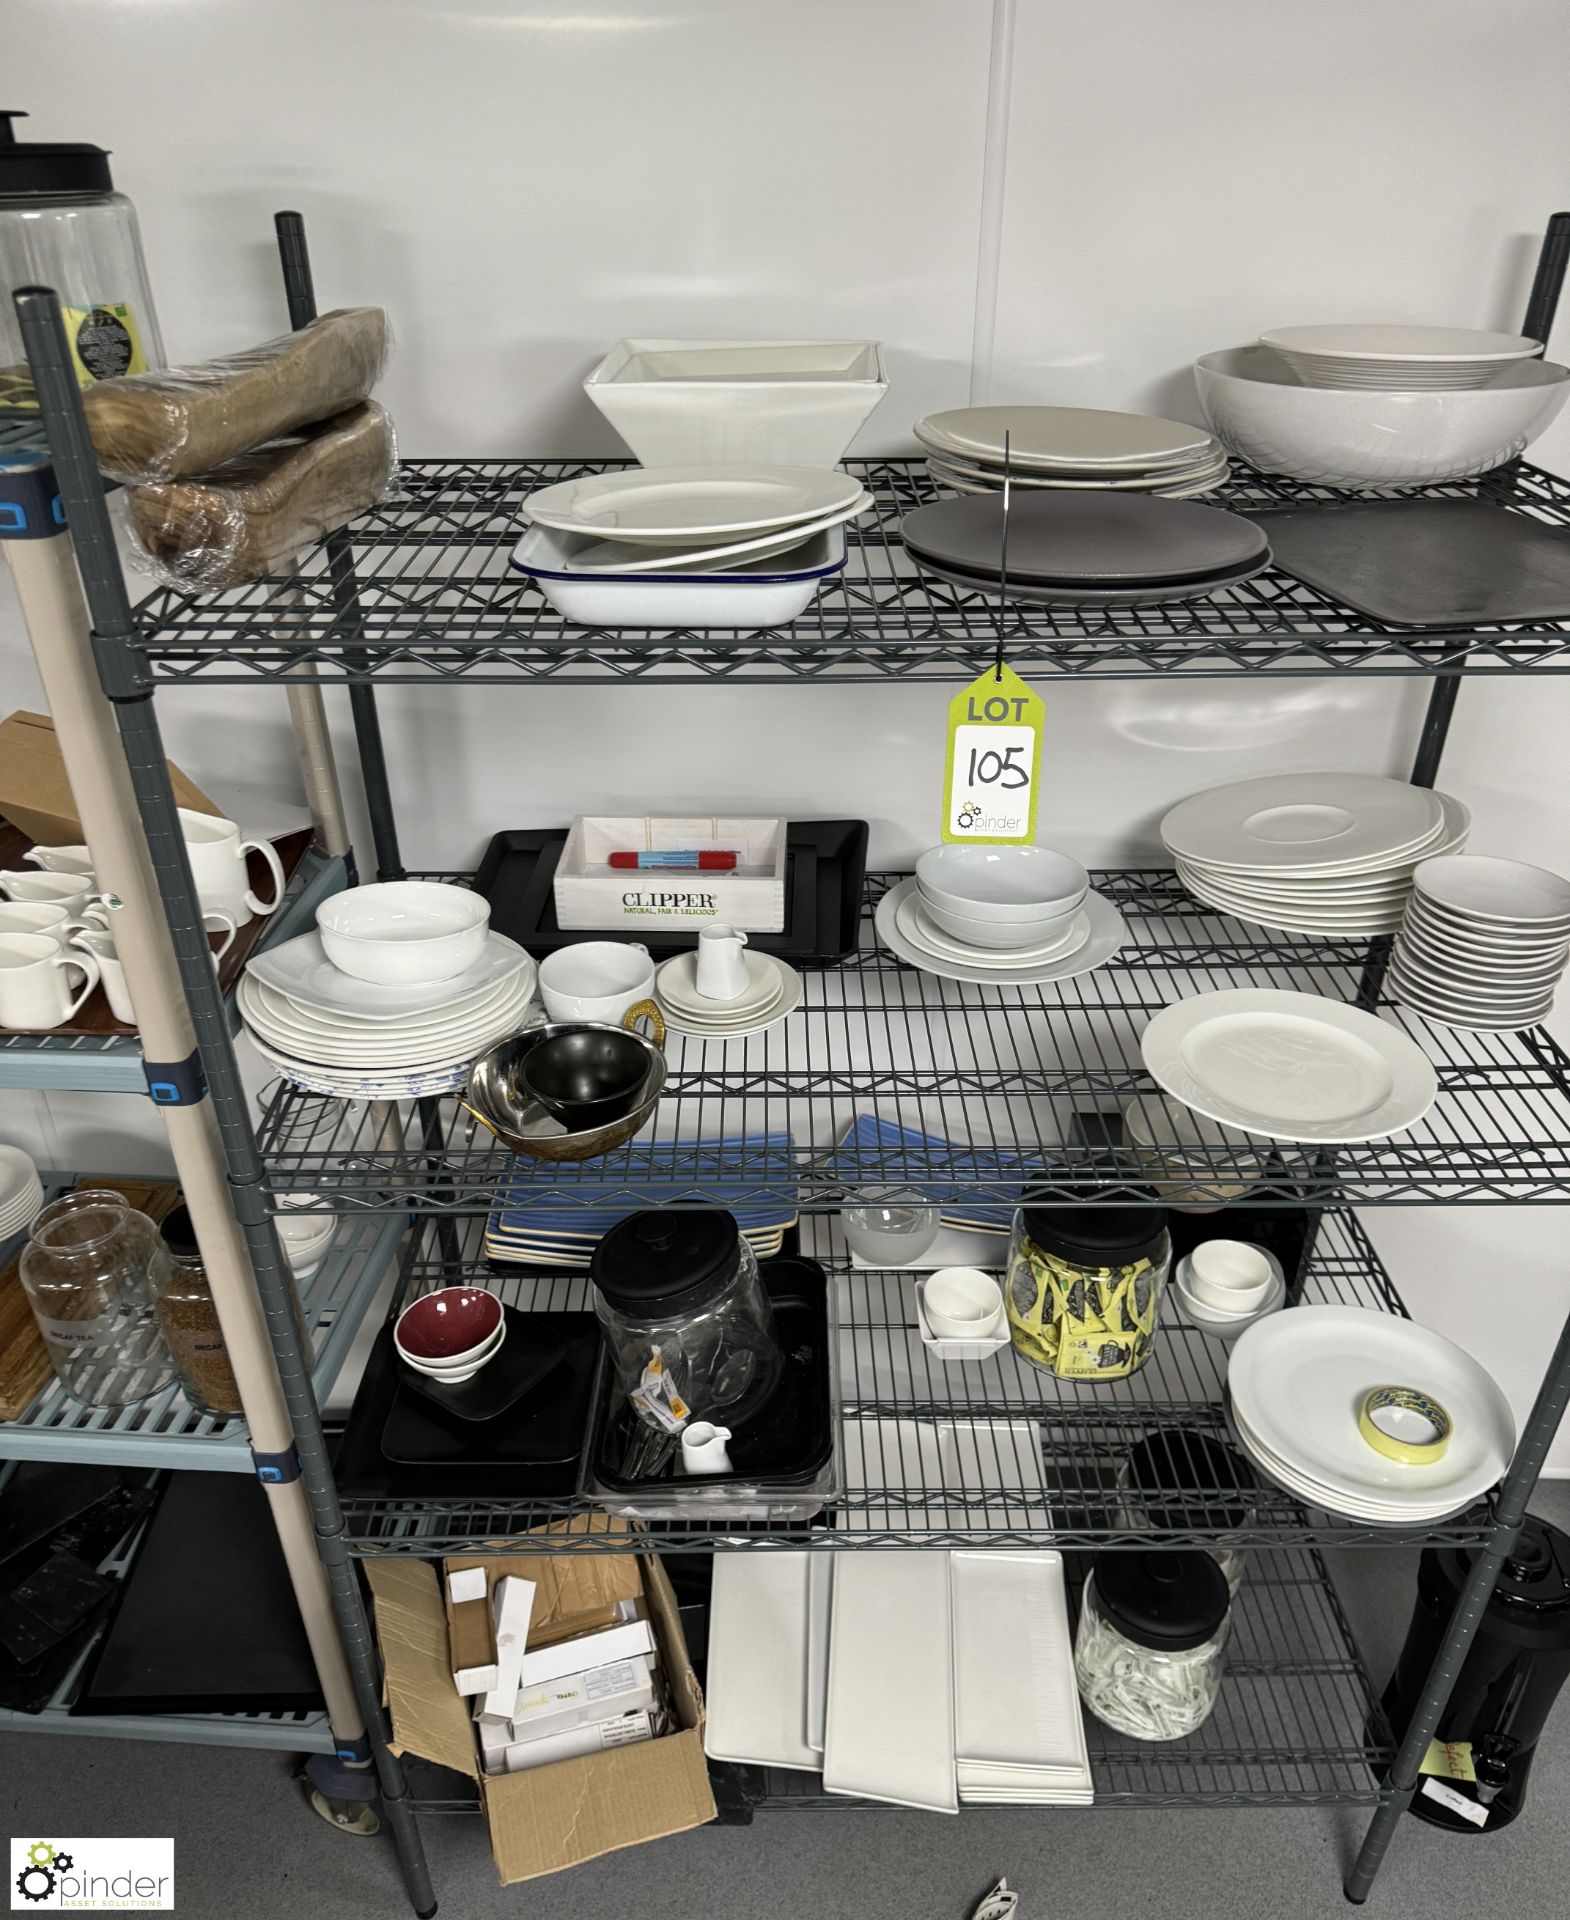 2 various Racks and Contents, including crockery, jars, etc (location in building – basement kitchen - Image 3 of 7